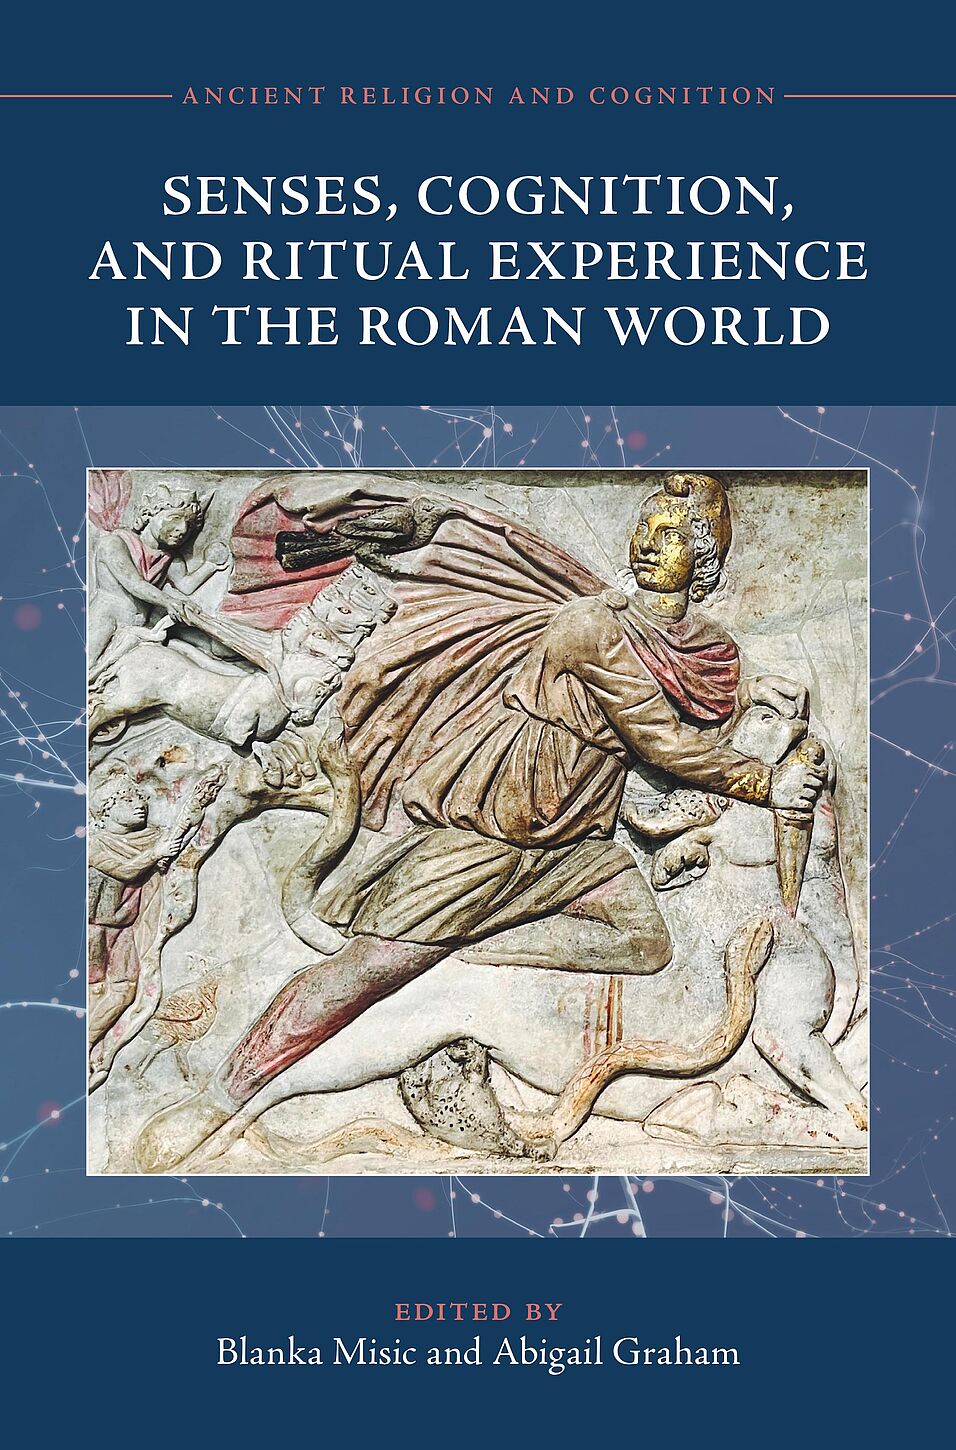 Ancient Religion and Cognition, Senses, Cognition, and Ritual Experience in the Roman World, Edited by Blanka Misic and Abigail Graham